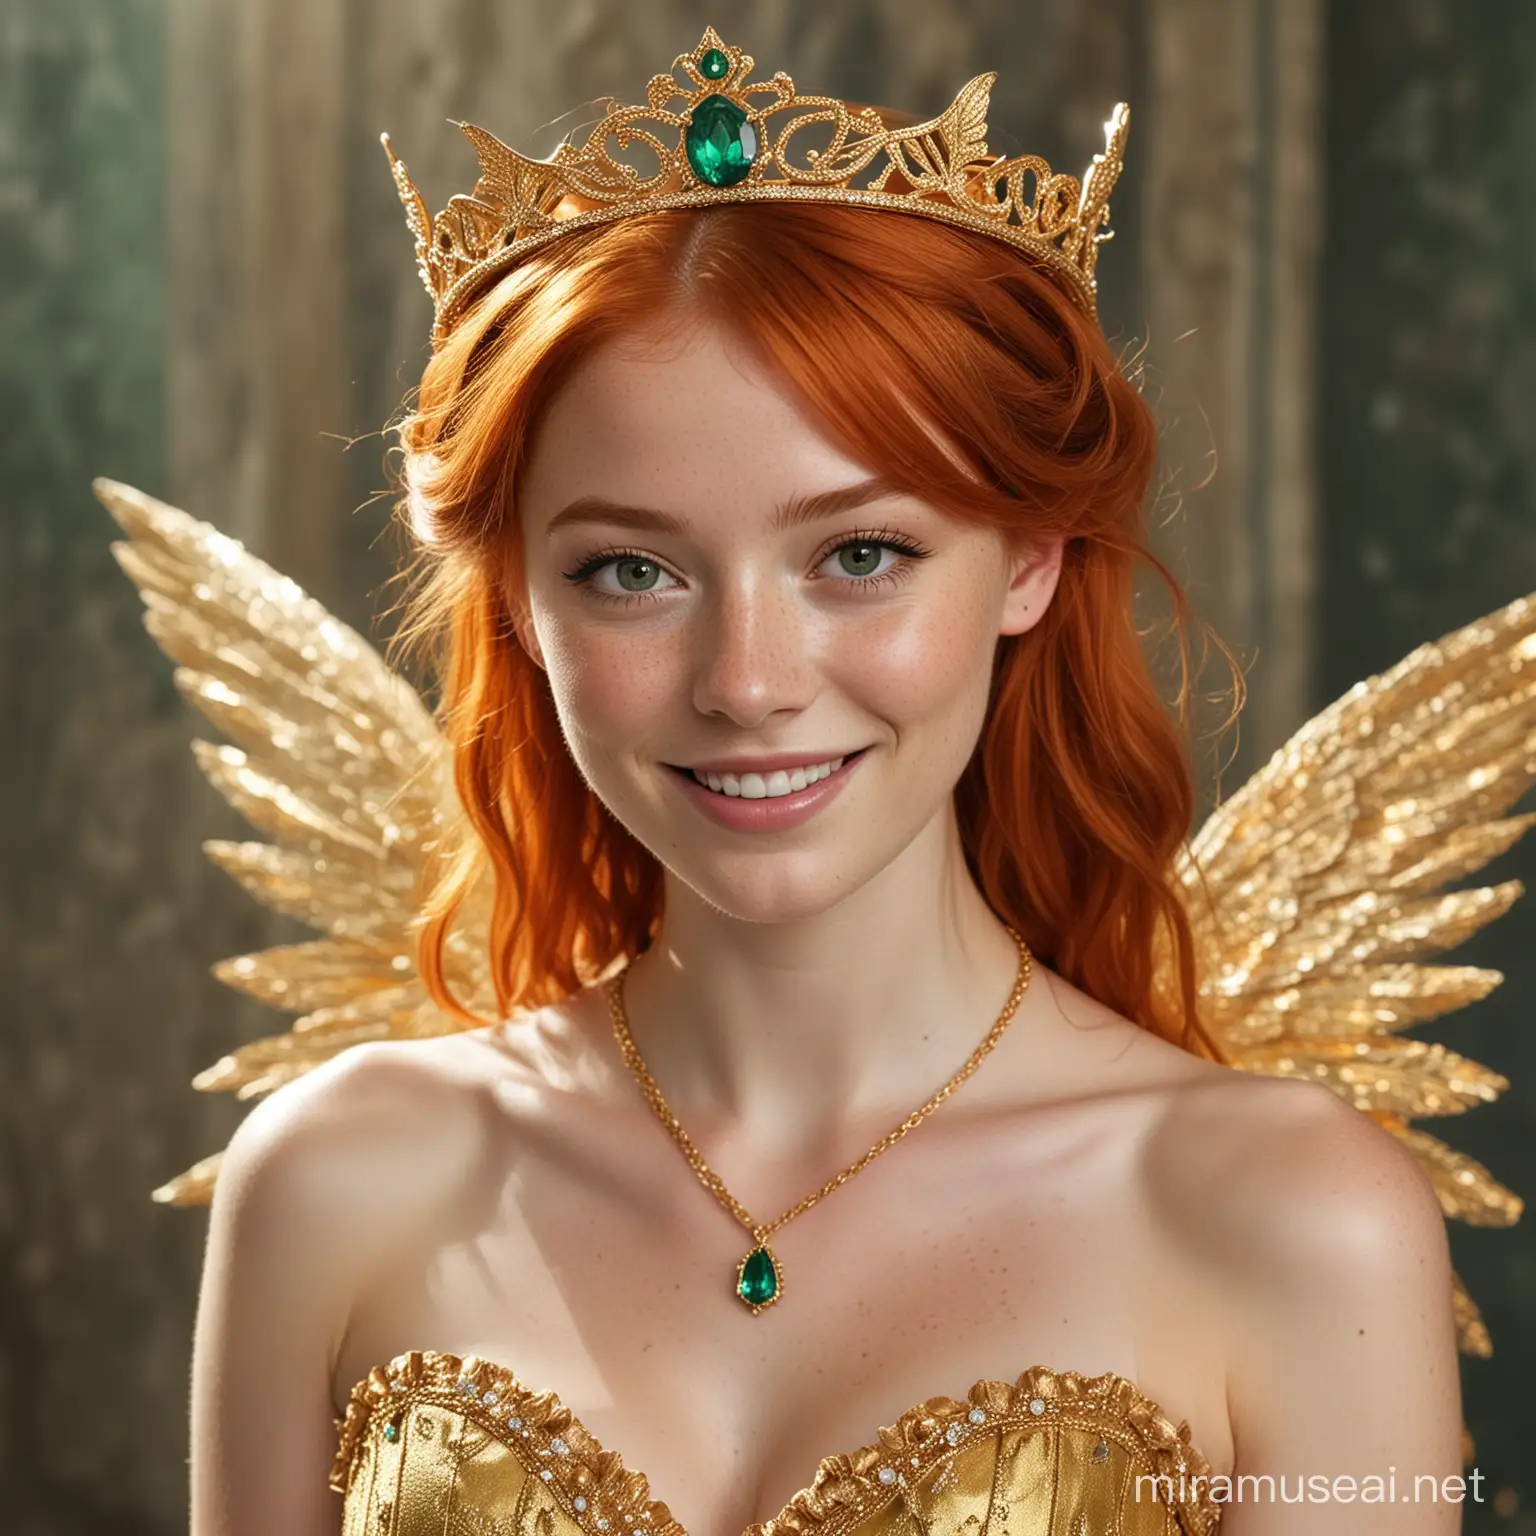 A young fairy woman with flaming red hair, freckles, fair skin, symmetrical face, fair golden wings, gold necklace with an emerald, golden short cocktail frill dress, cheery smile, gold tiara, simply gorgeous and cute